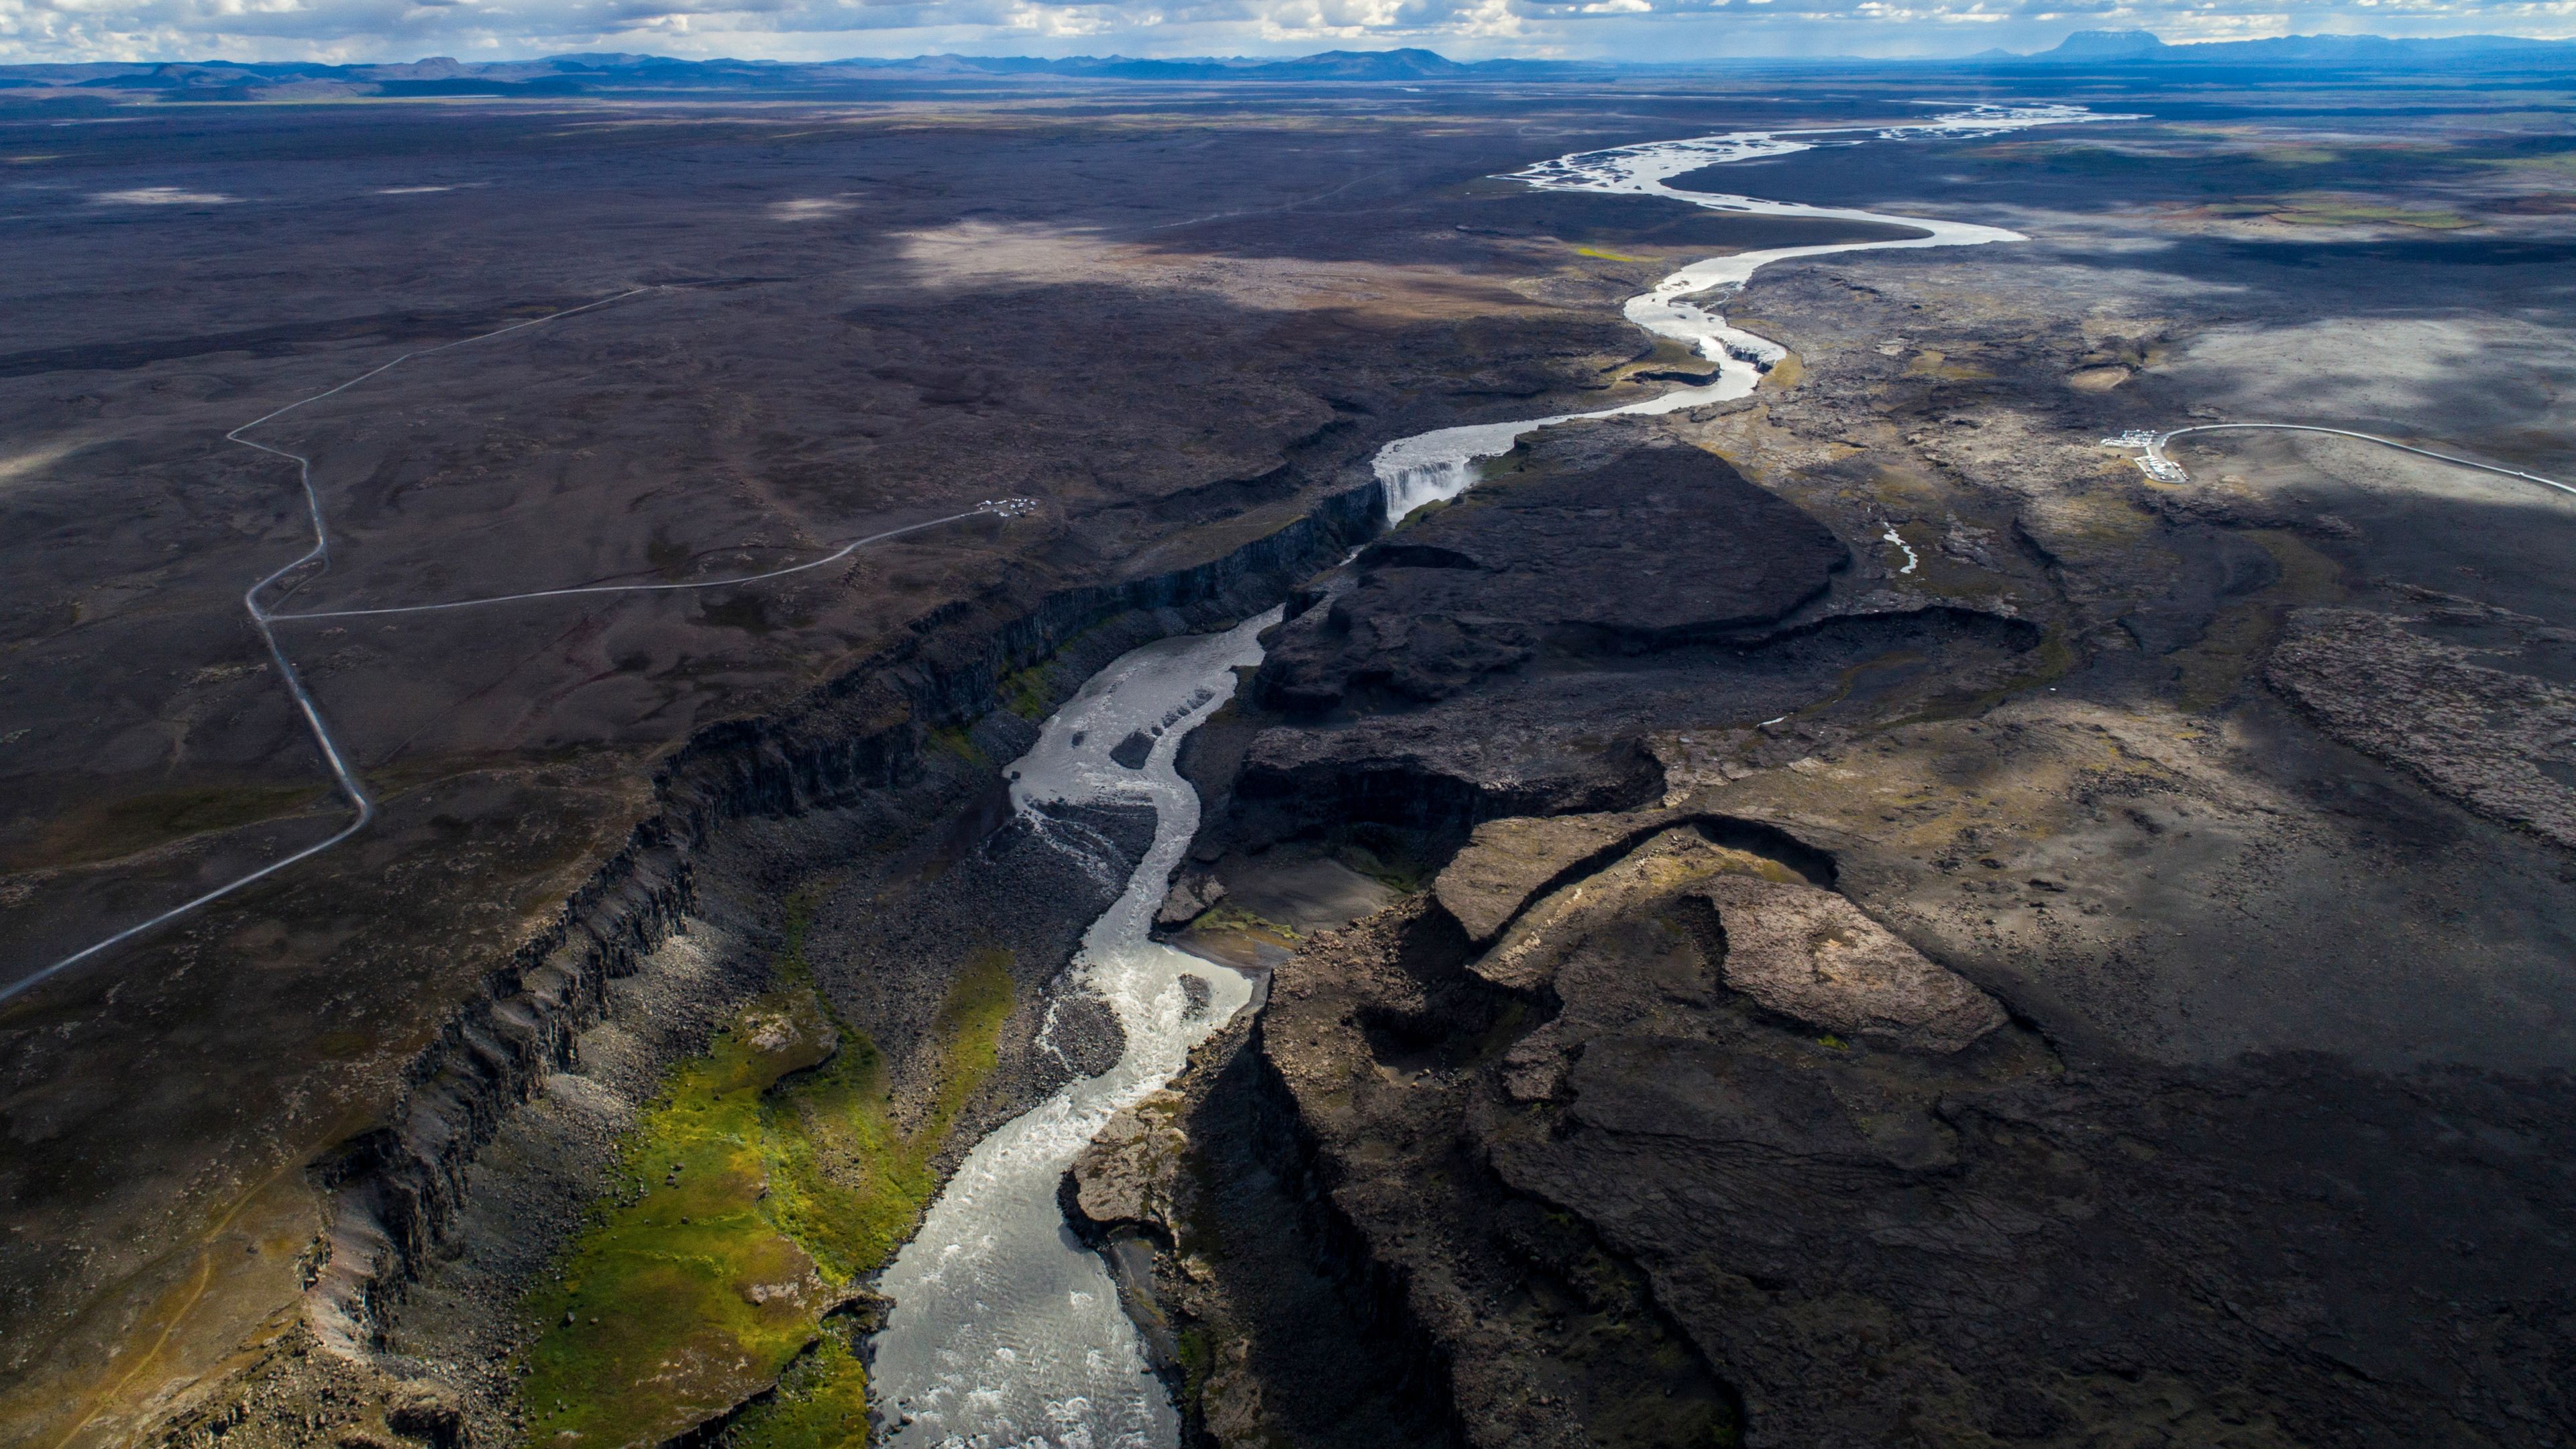 Aerial view of Jokulsargljufur Canyon with its impressive canyons in iceland and Vatnajökull National Park